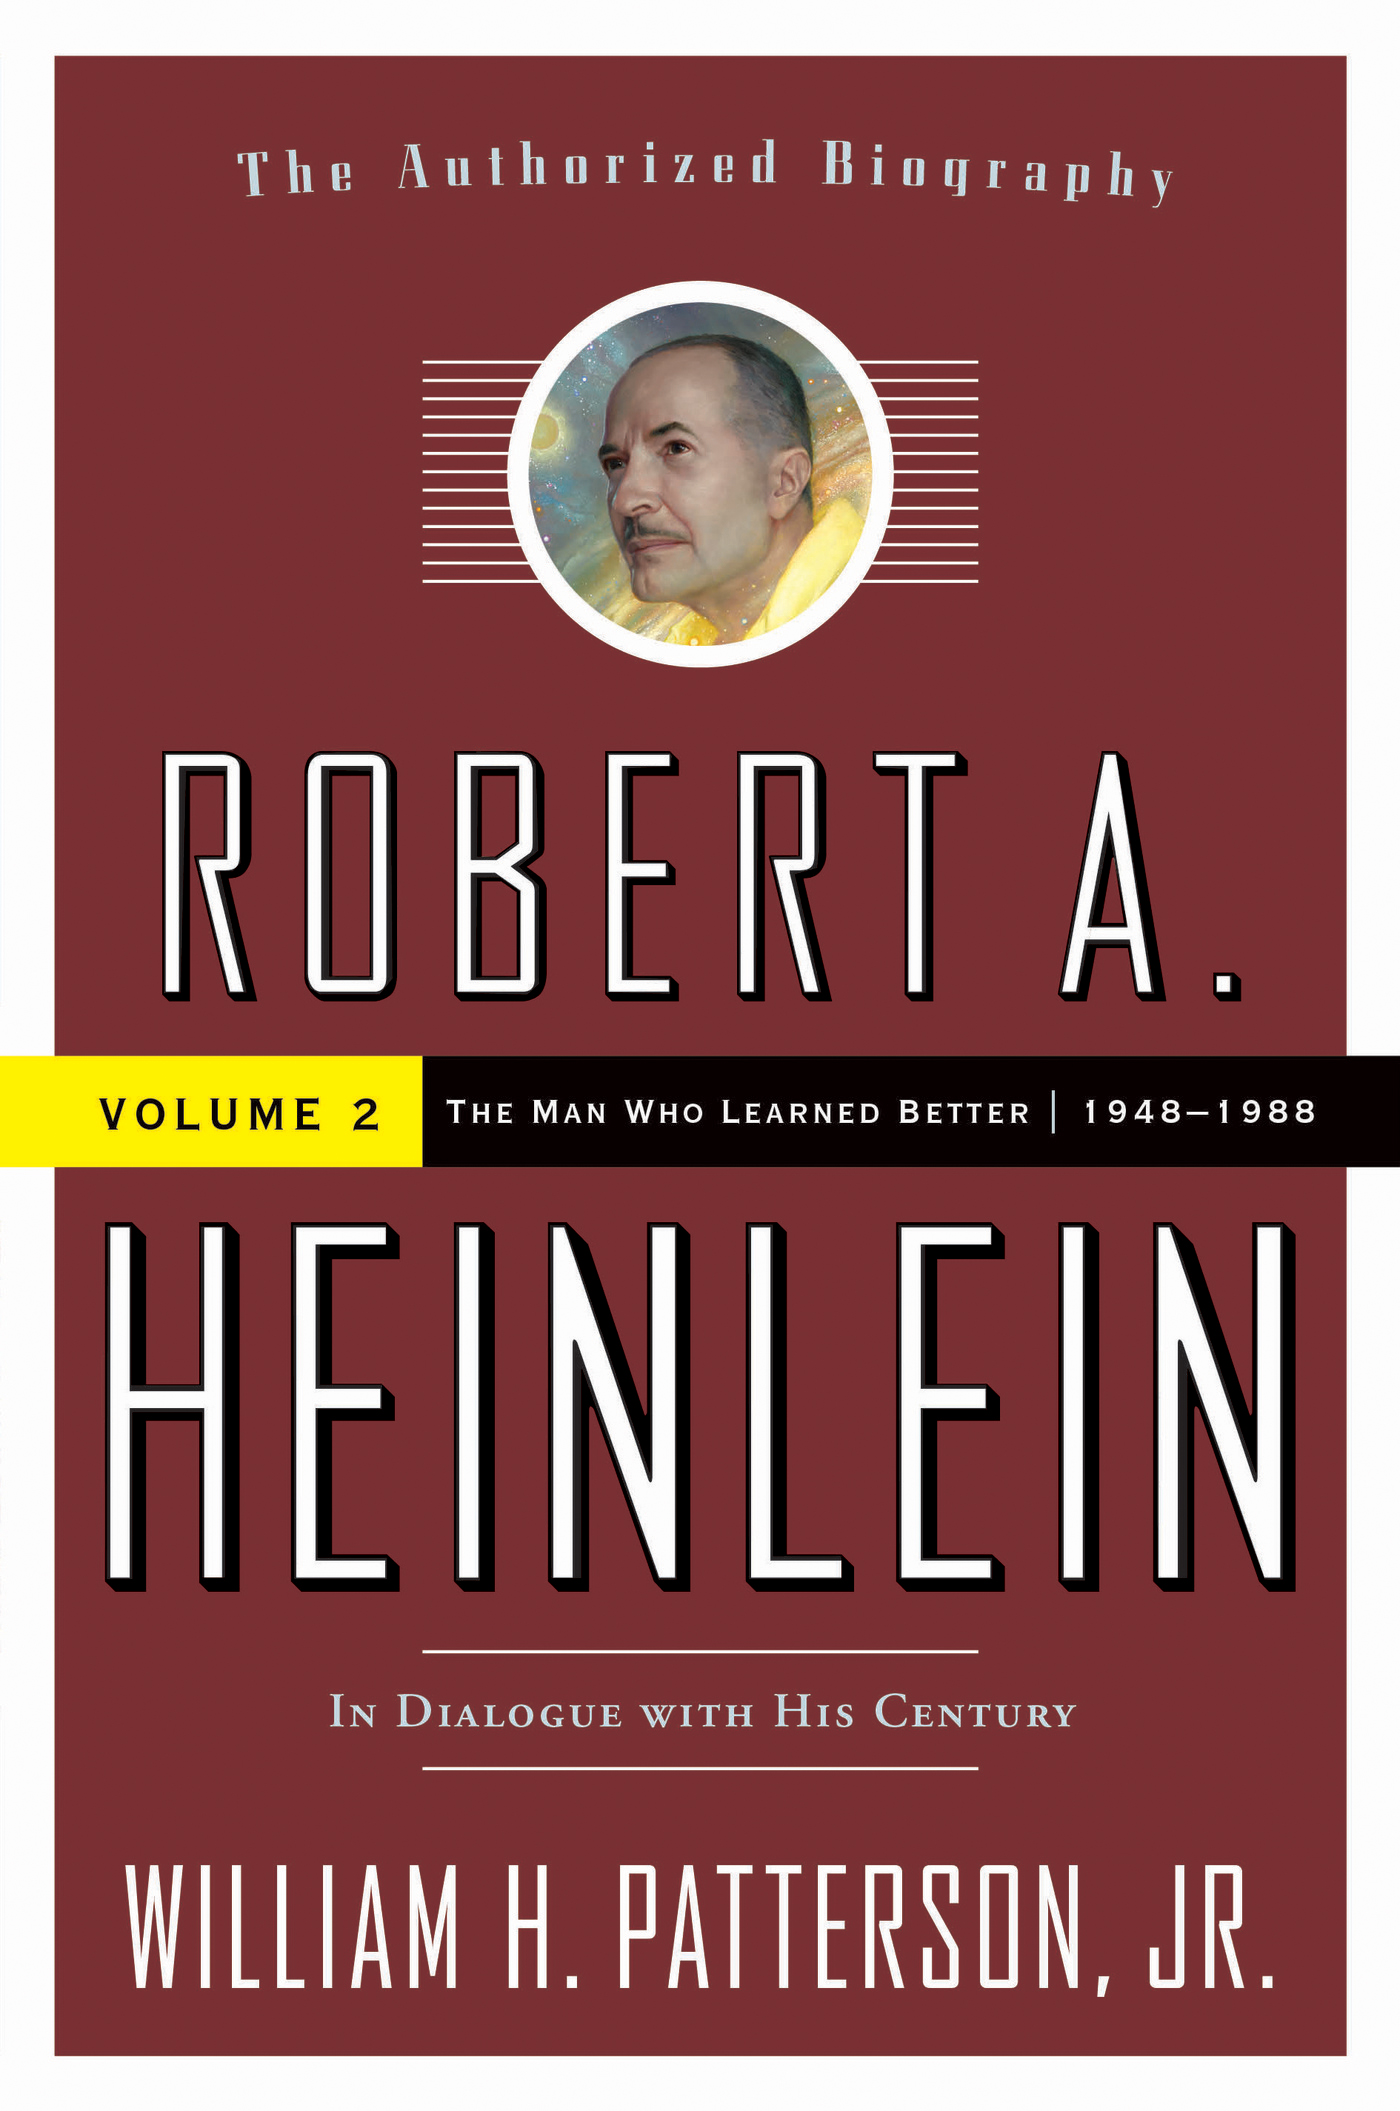 Robert A. Heinlein: In Dialogue with His Century, Volume 2 : The Man Who Learned Better (1948-1988) by William H. Patterson, Jr.